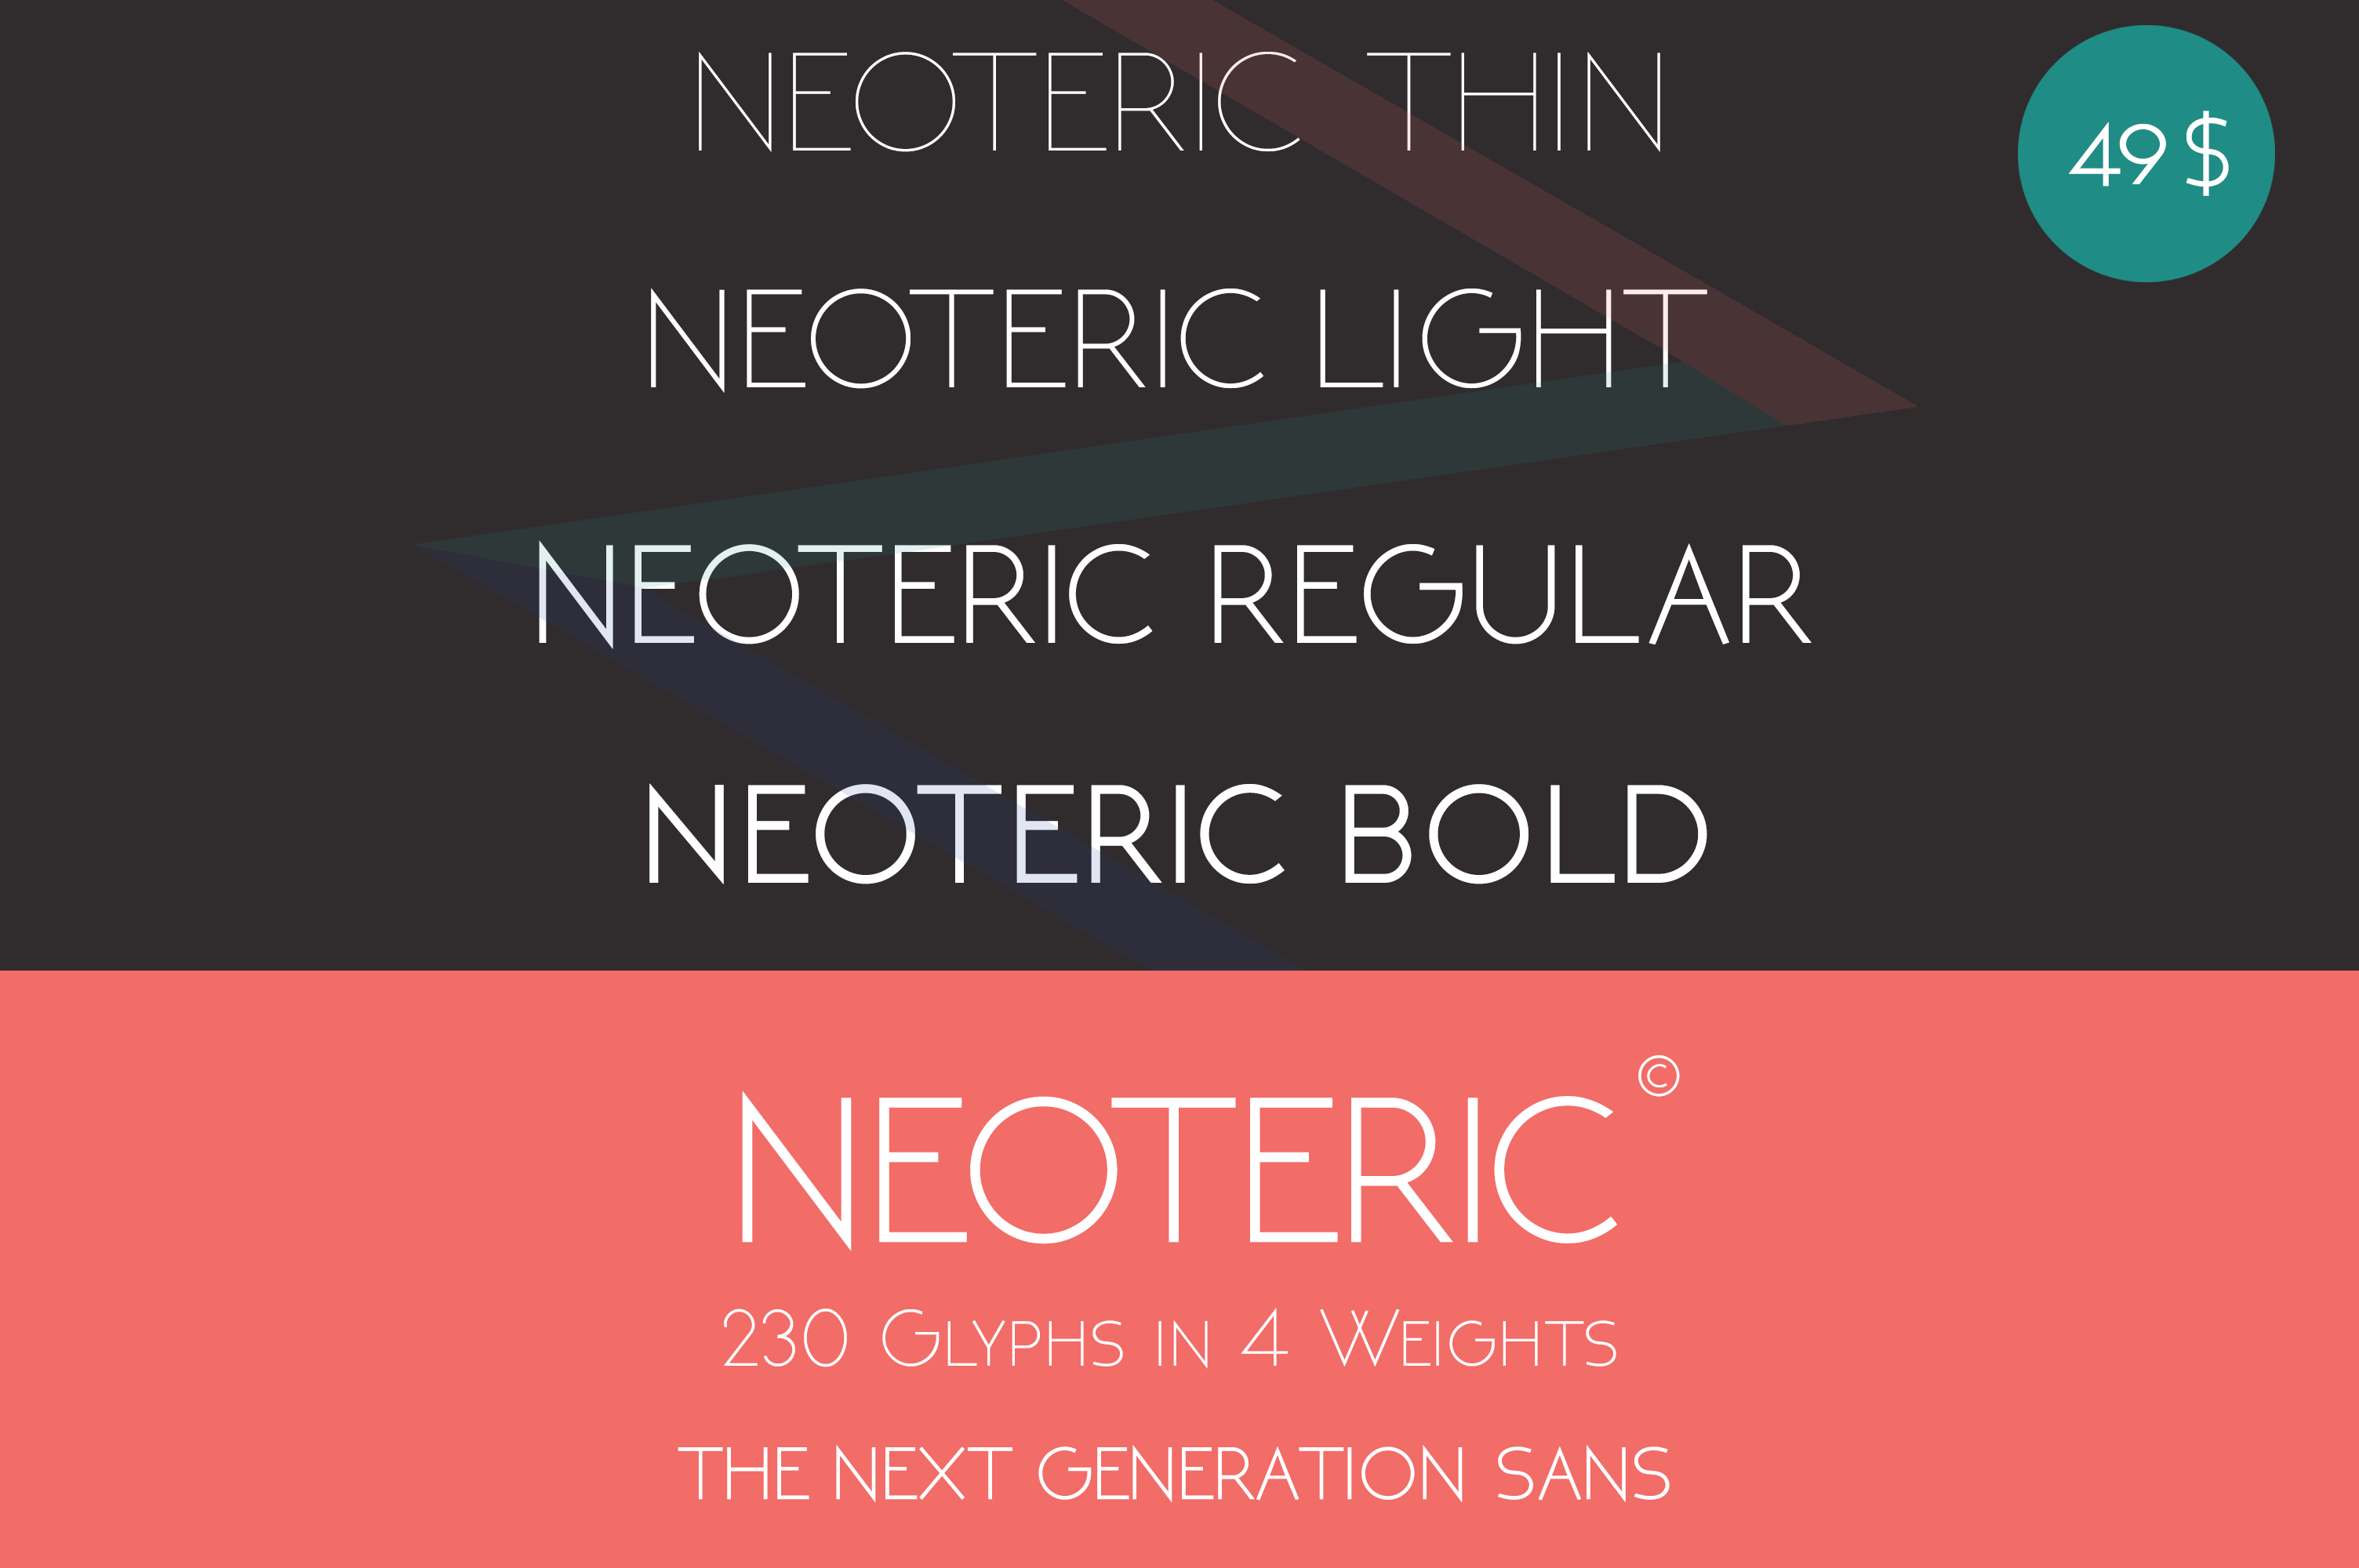 NEOTERIC